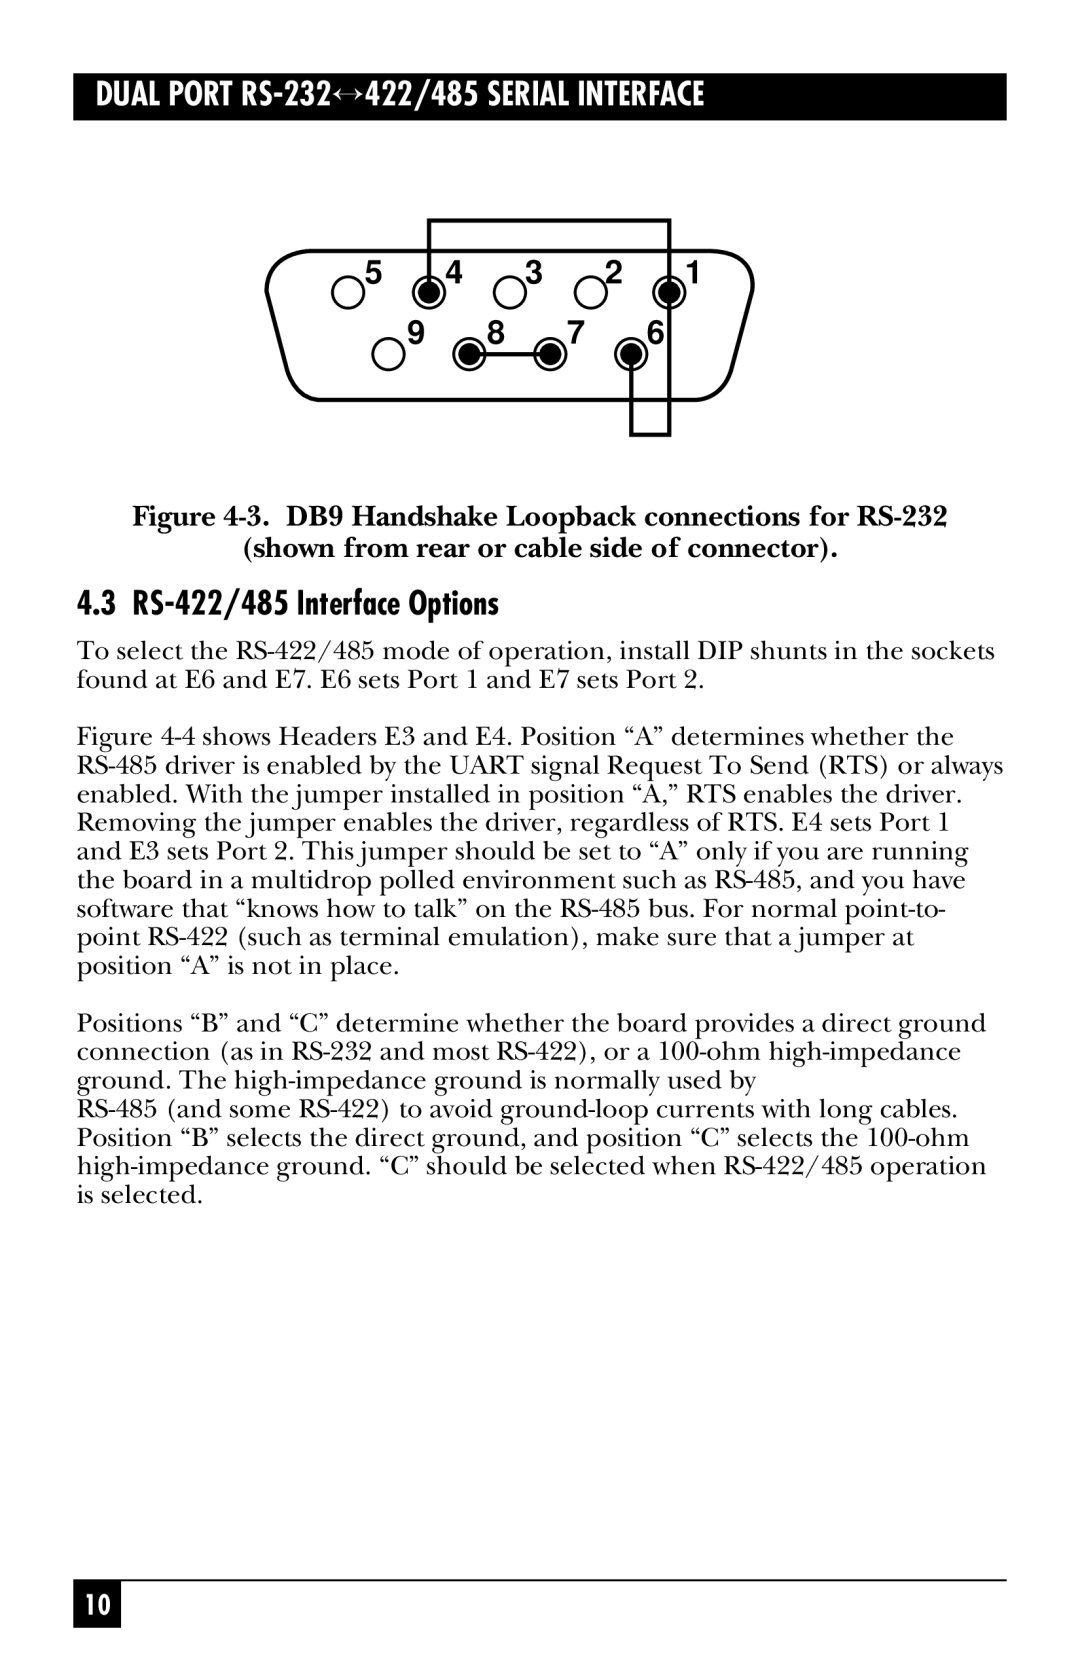 Black Box RS-485, IC175C, IC113C manual 4.3 RS-422/485 Interface Options, 3. DB9 Handshake Loopback connections for RS-232 